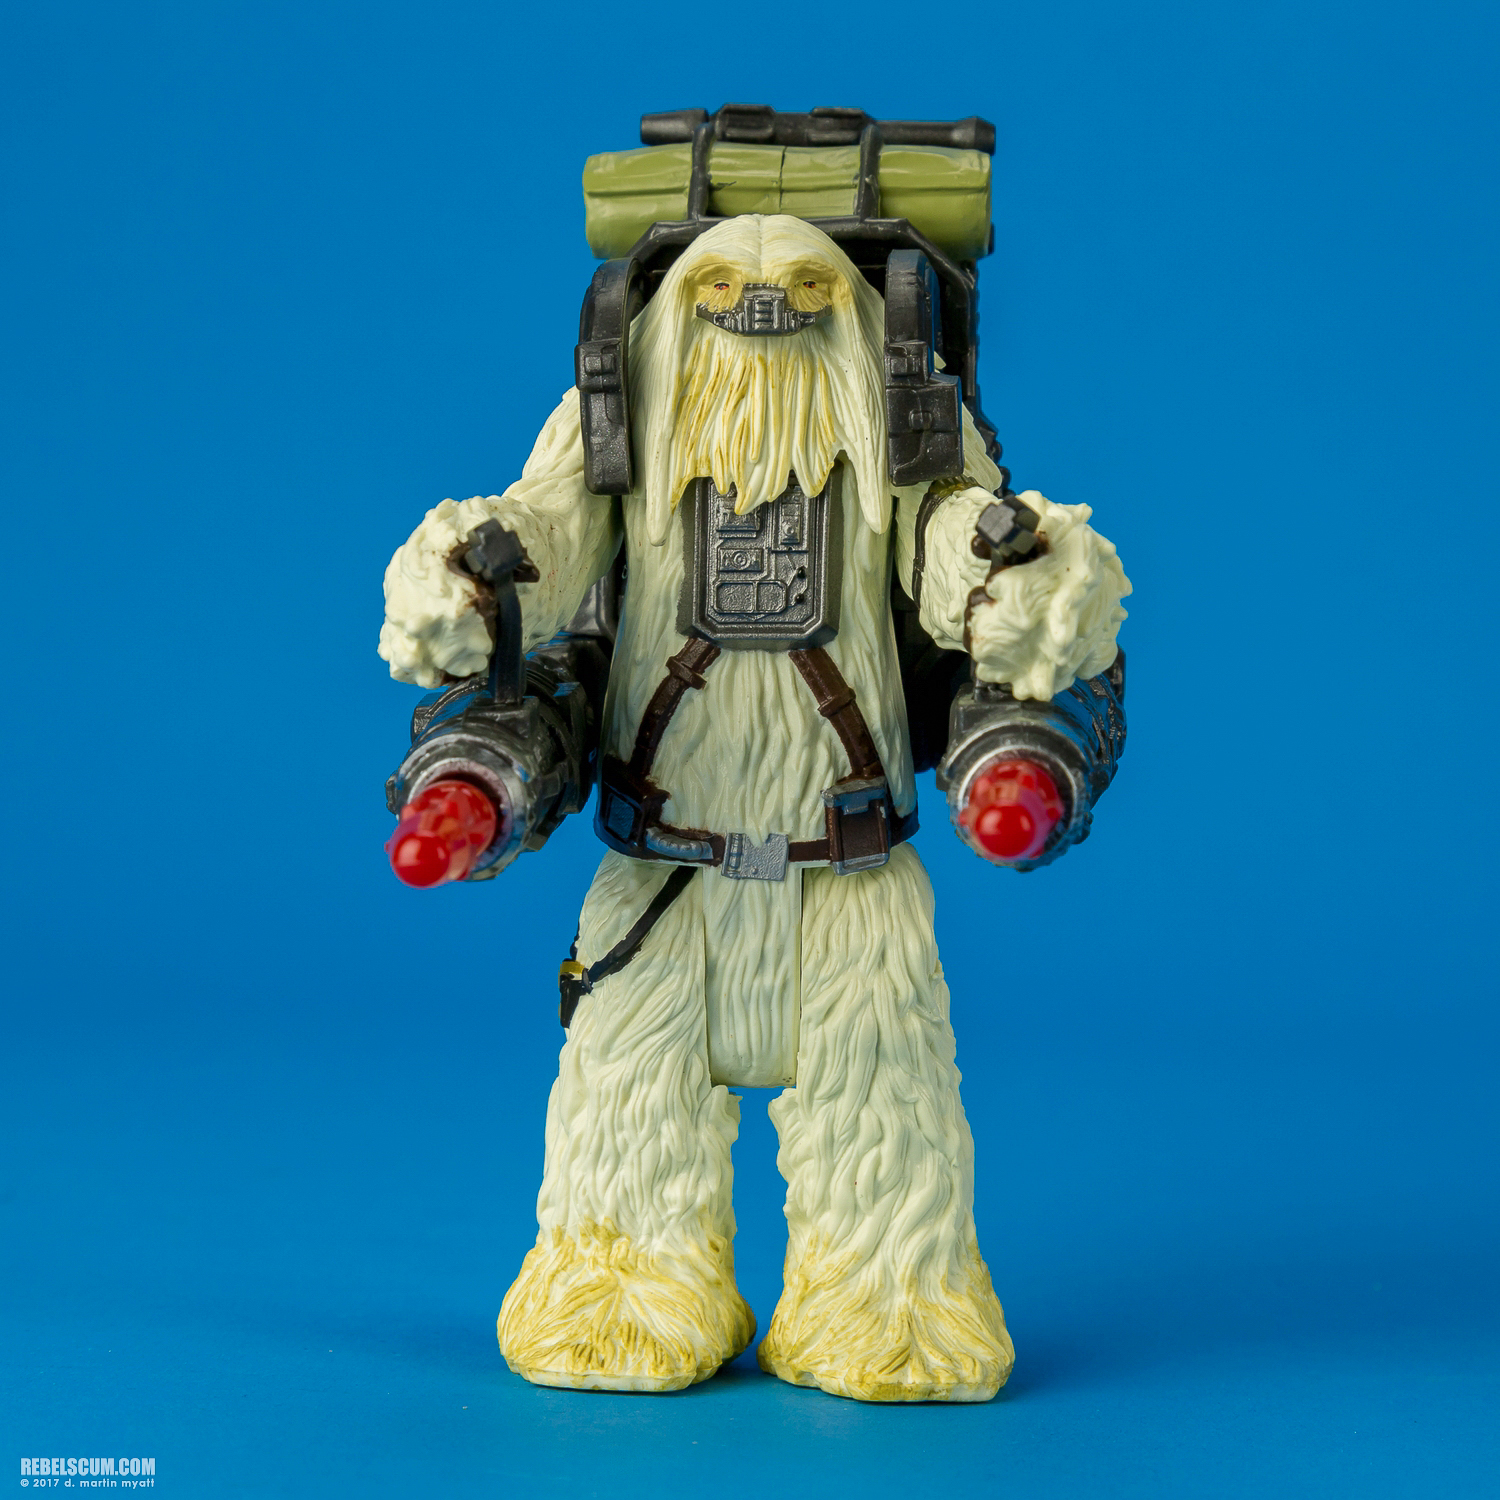 Kohls-Exclusive-Four-Pack-Rogue-One-B9605-034.jpg